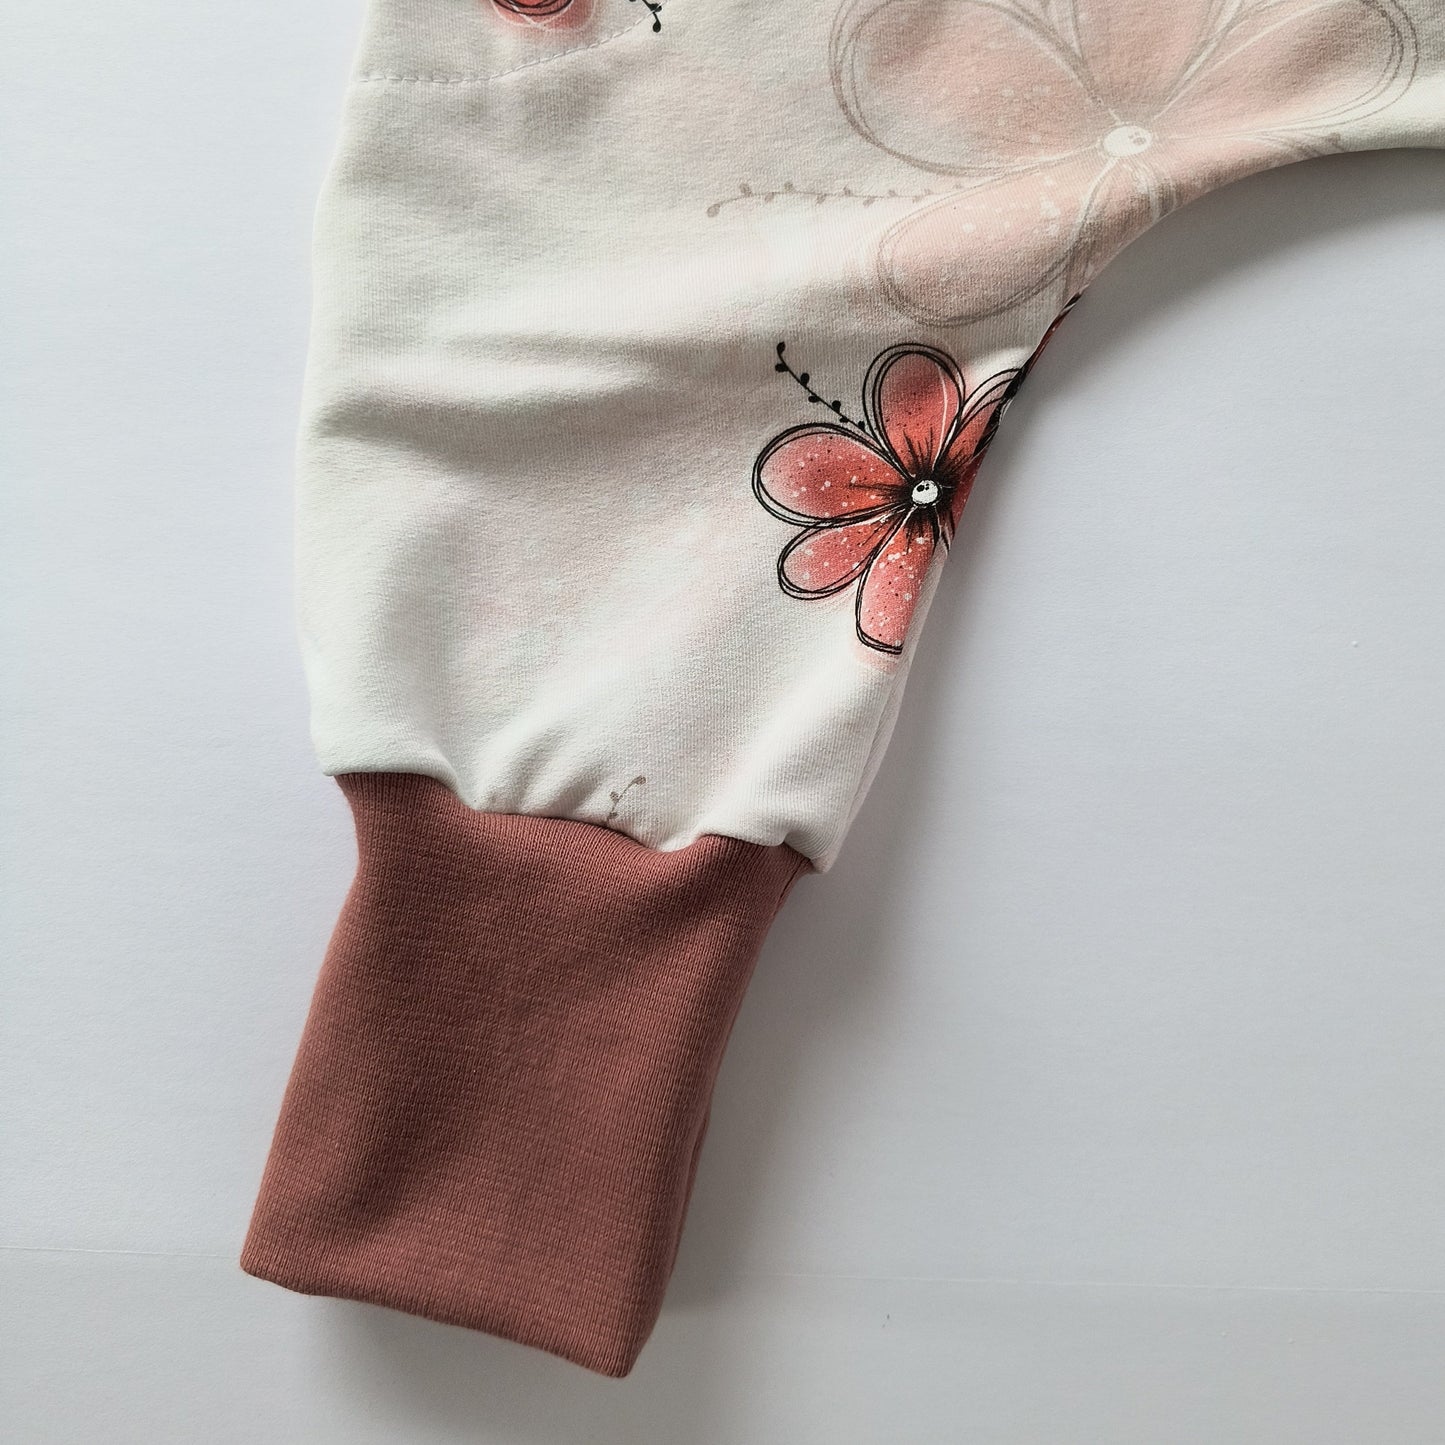 Baby sweat pants "grow with me", dream flowers, size EUR 80-86 cm / US 10-18 months (Handmade in Canada)